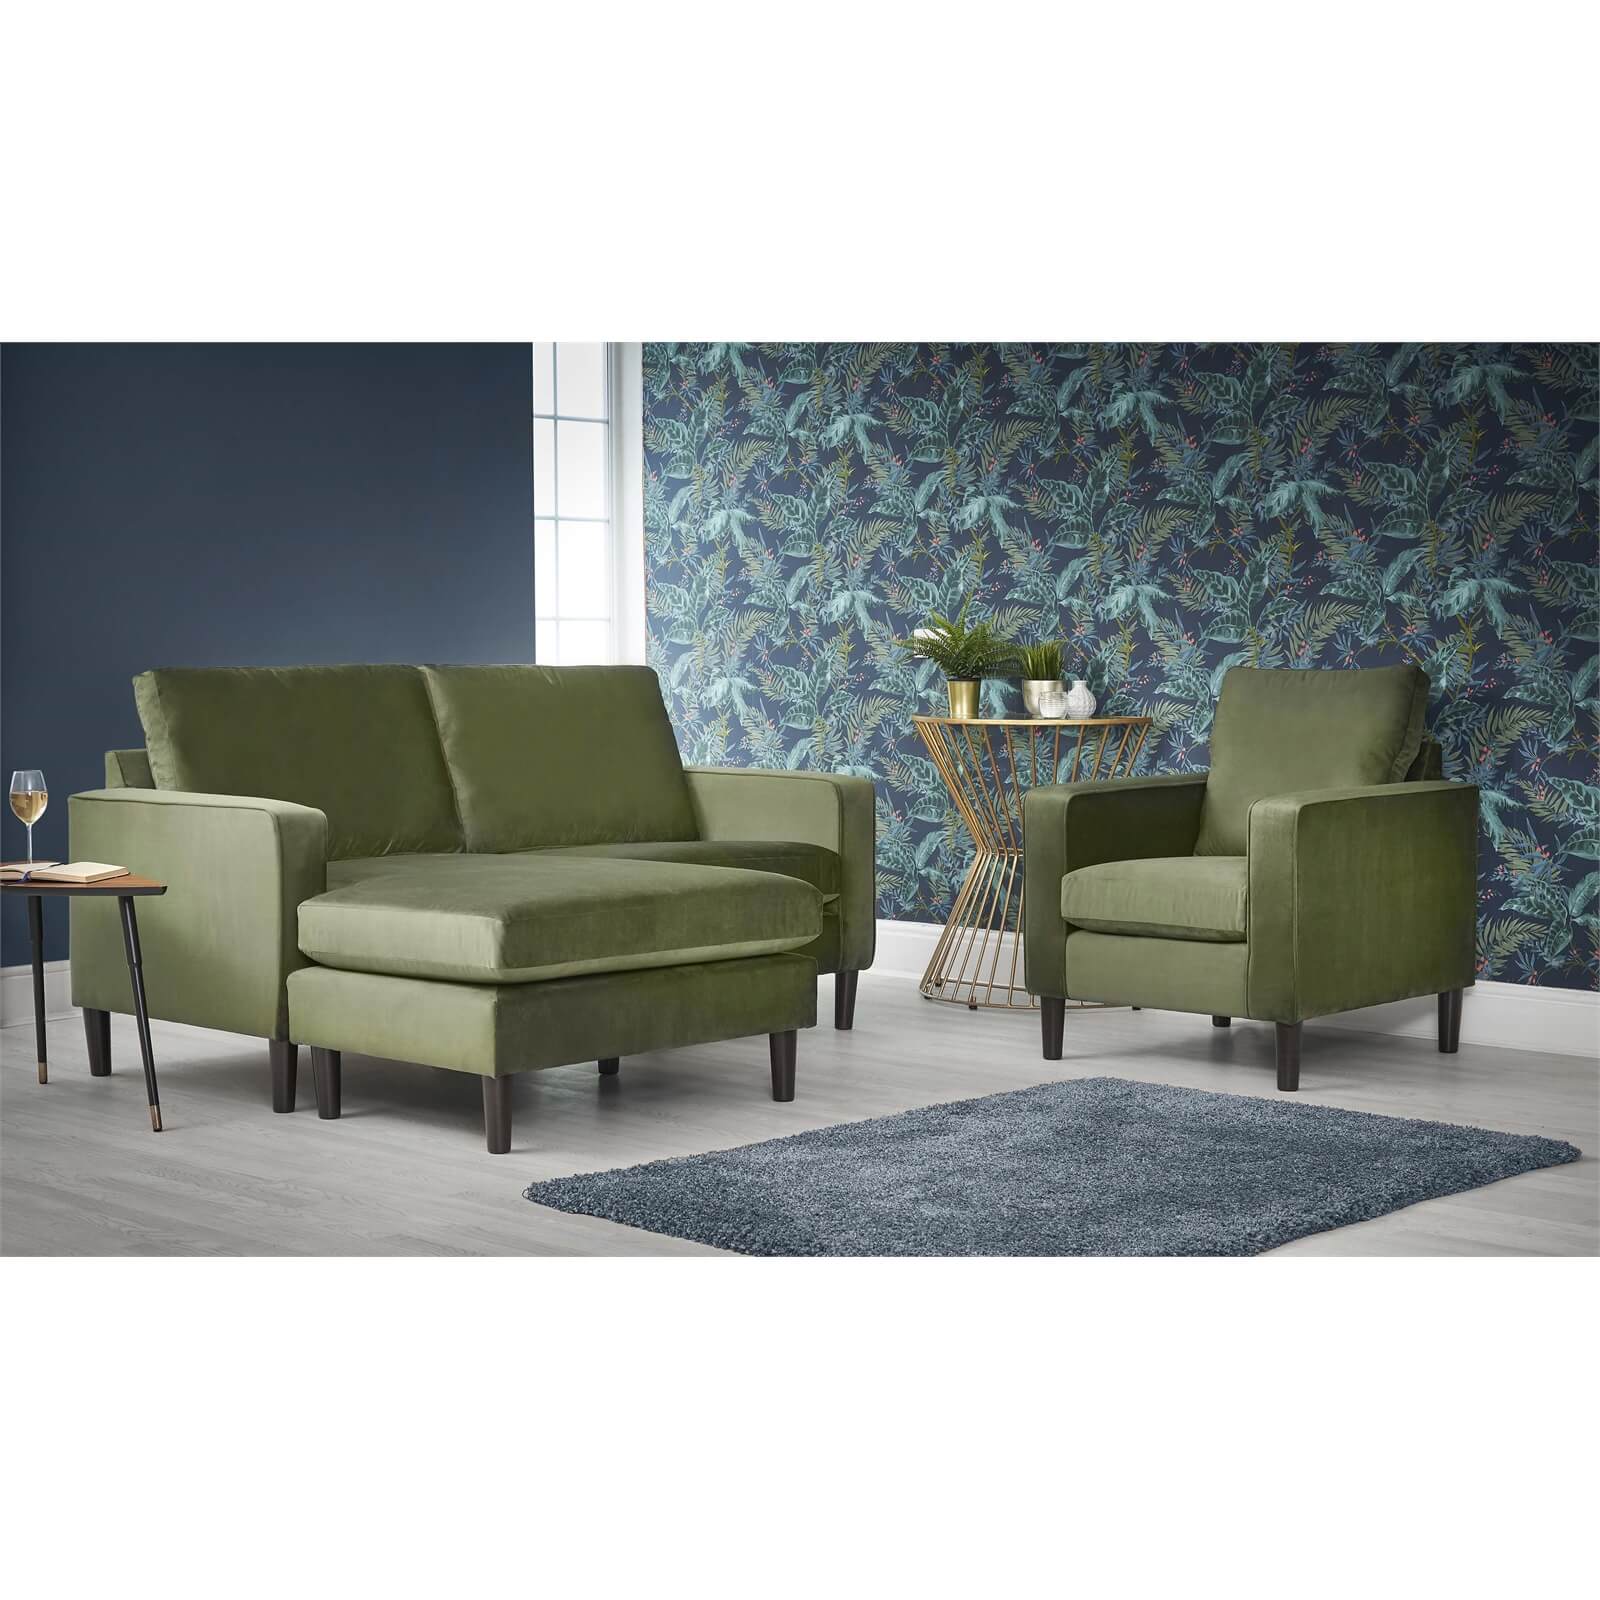 Harrison 3 Seater Sofa - Forest